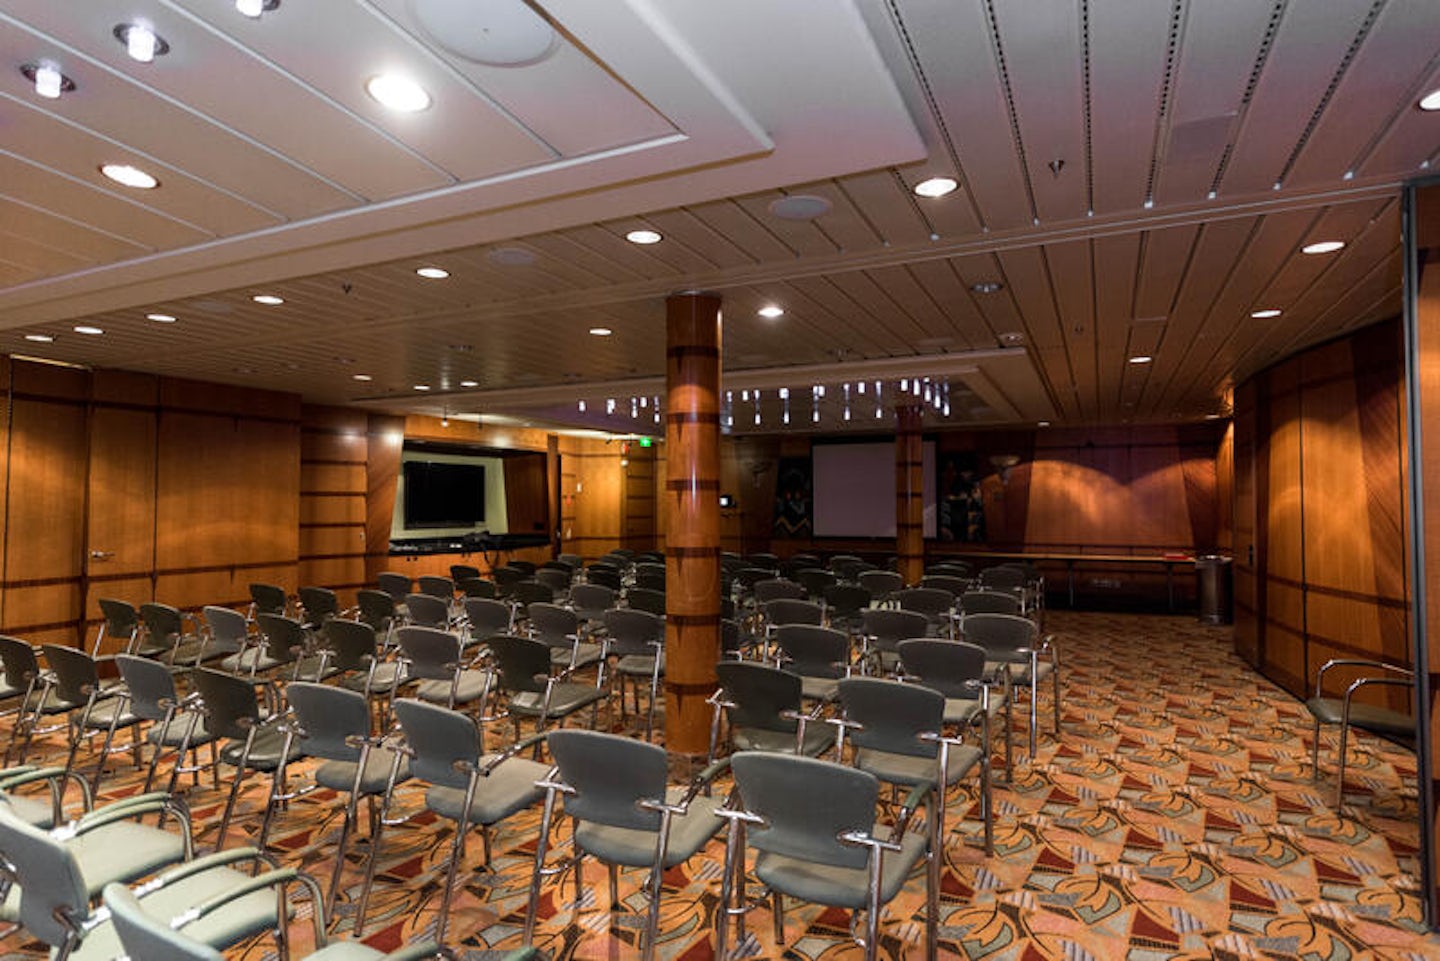 Conference Center on Adventure of the Seas